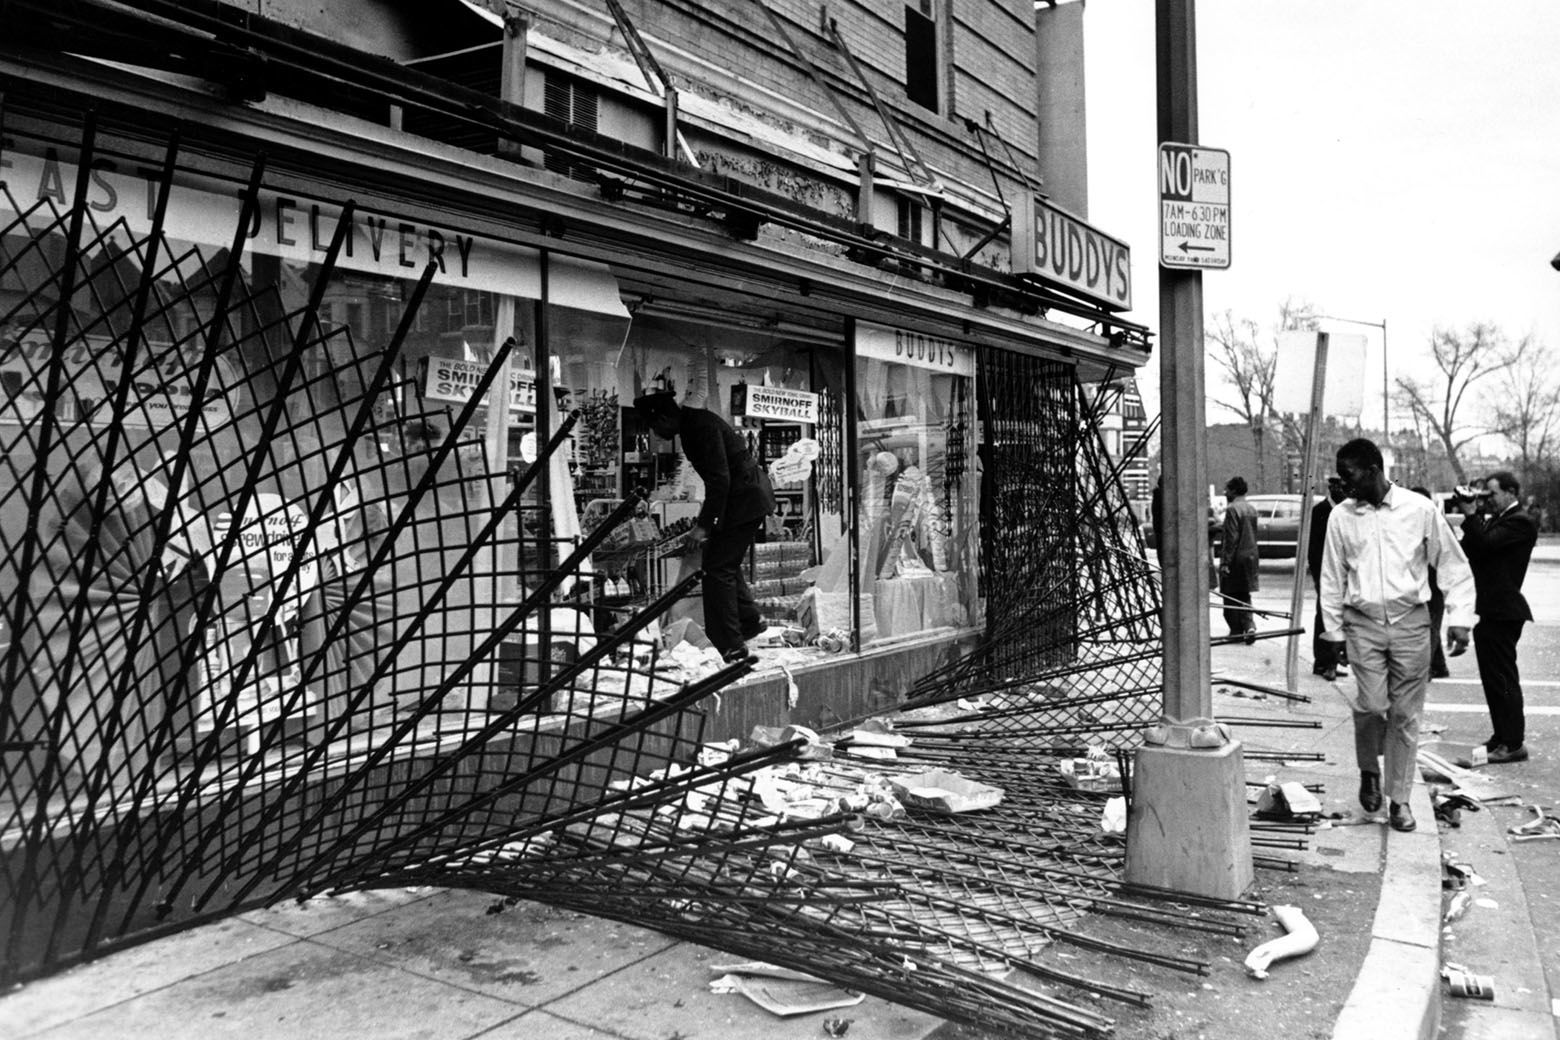 A policeman climbs over a protective screen and through the shattered glass front of a liquor store on 14th Street in Washington D.C. on April 5, 1968.  Violence broke out the day before in response to the assasination of the Rev. Martin Luther King Jr.  (AP Photo)